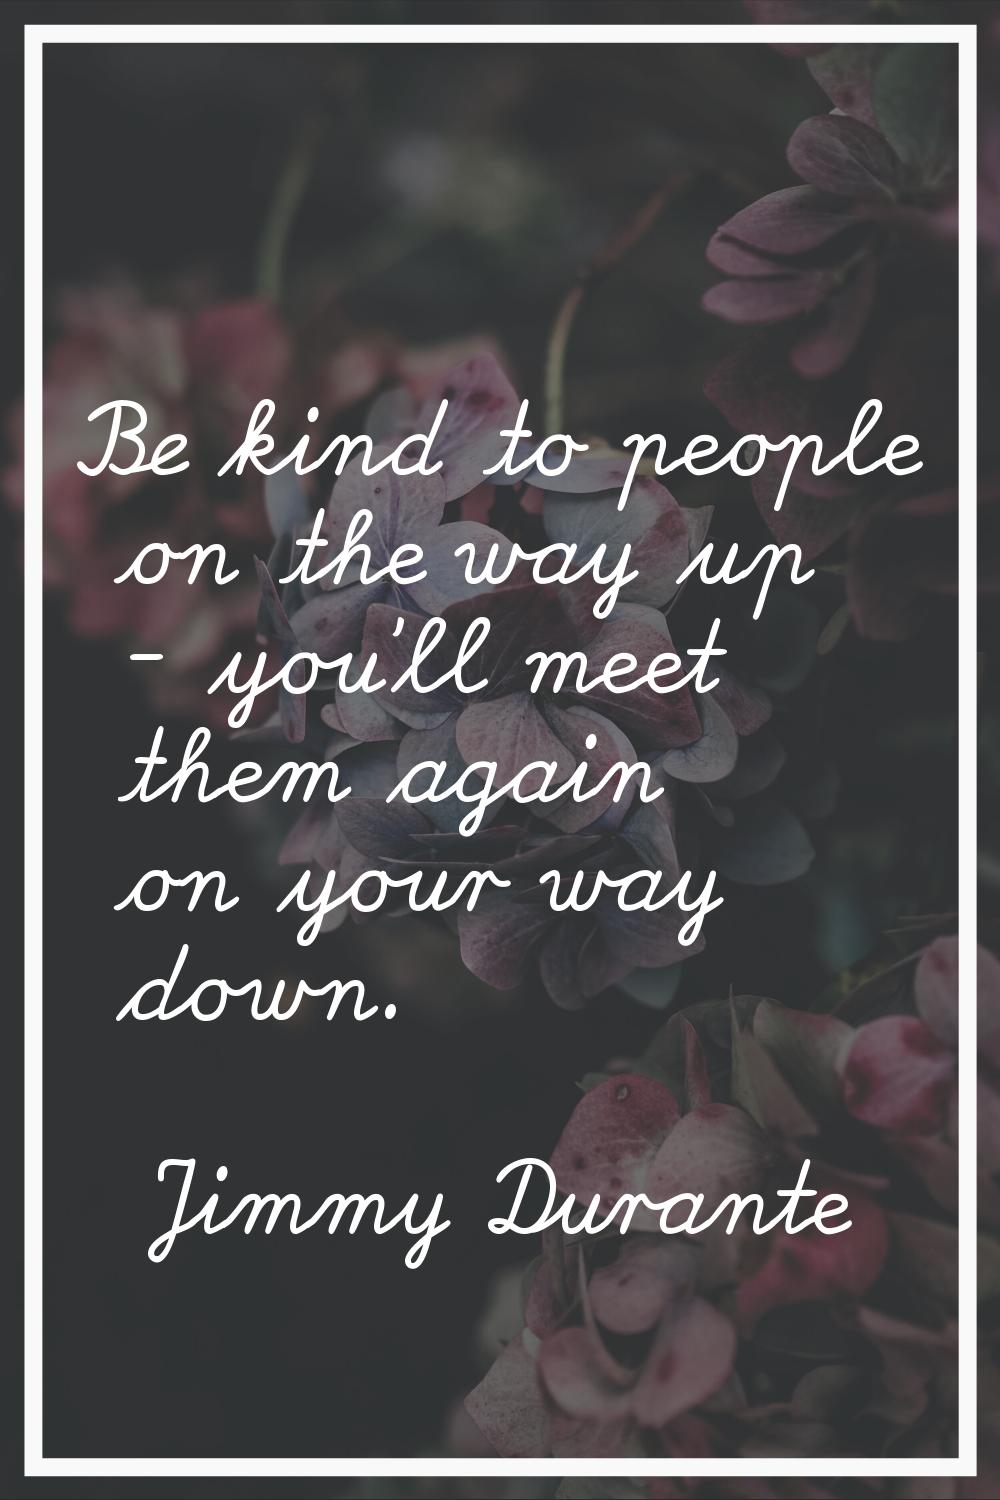 Be kind to people on the way up - you'll meet them again on your way down.